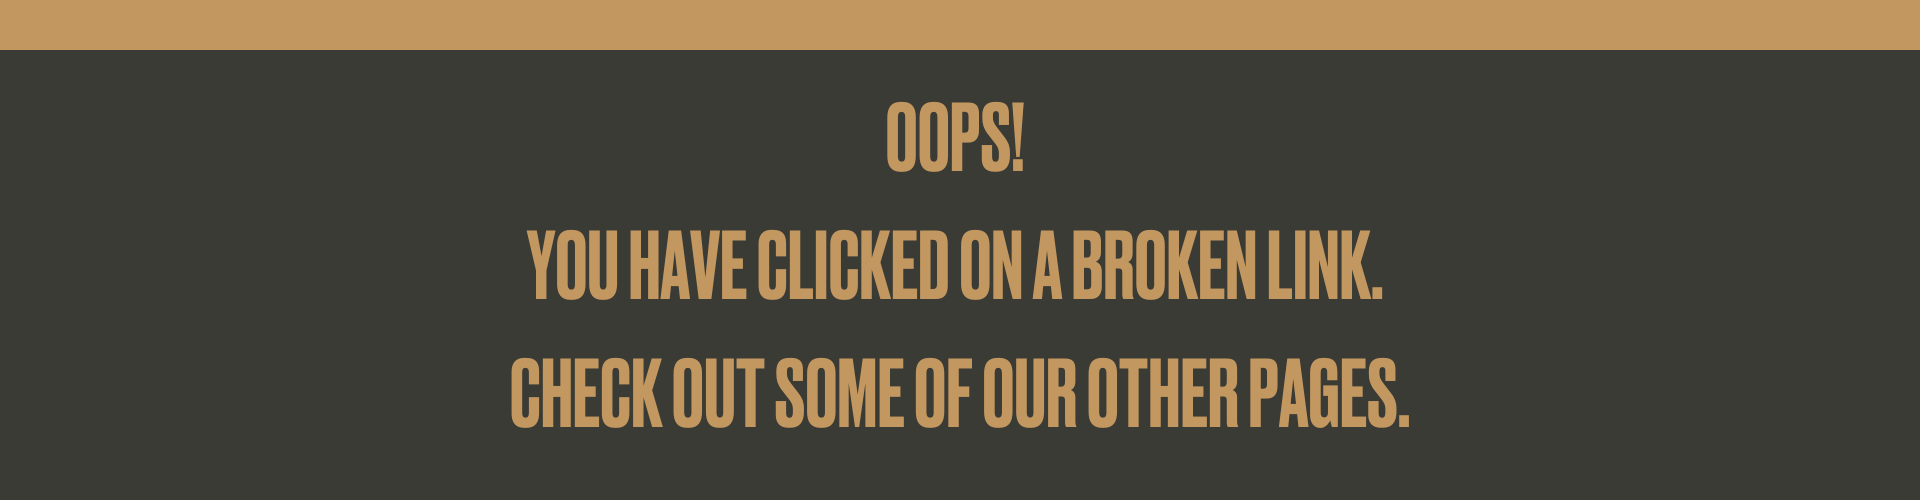 Oops! You've clicked on a broken link. Check out some of our other pages.